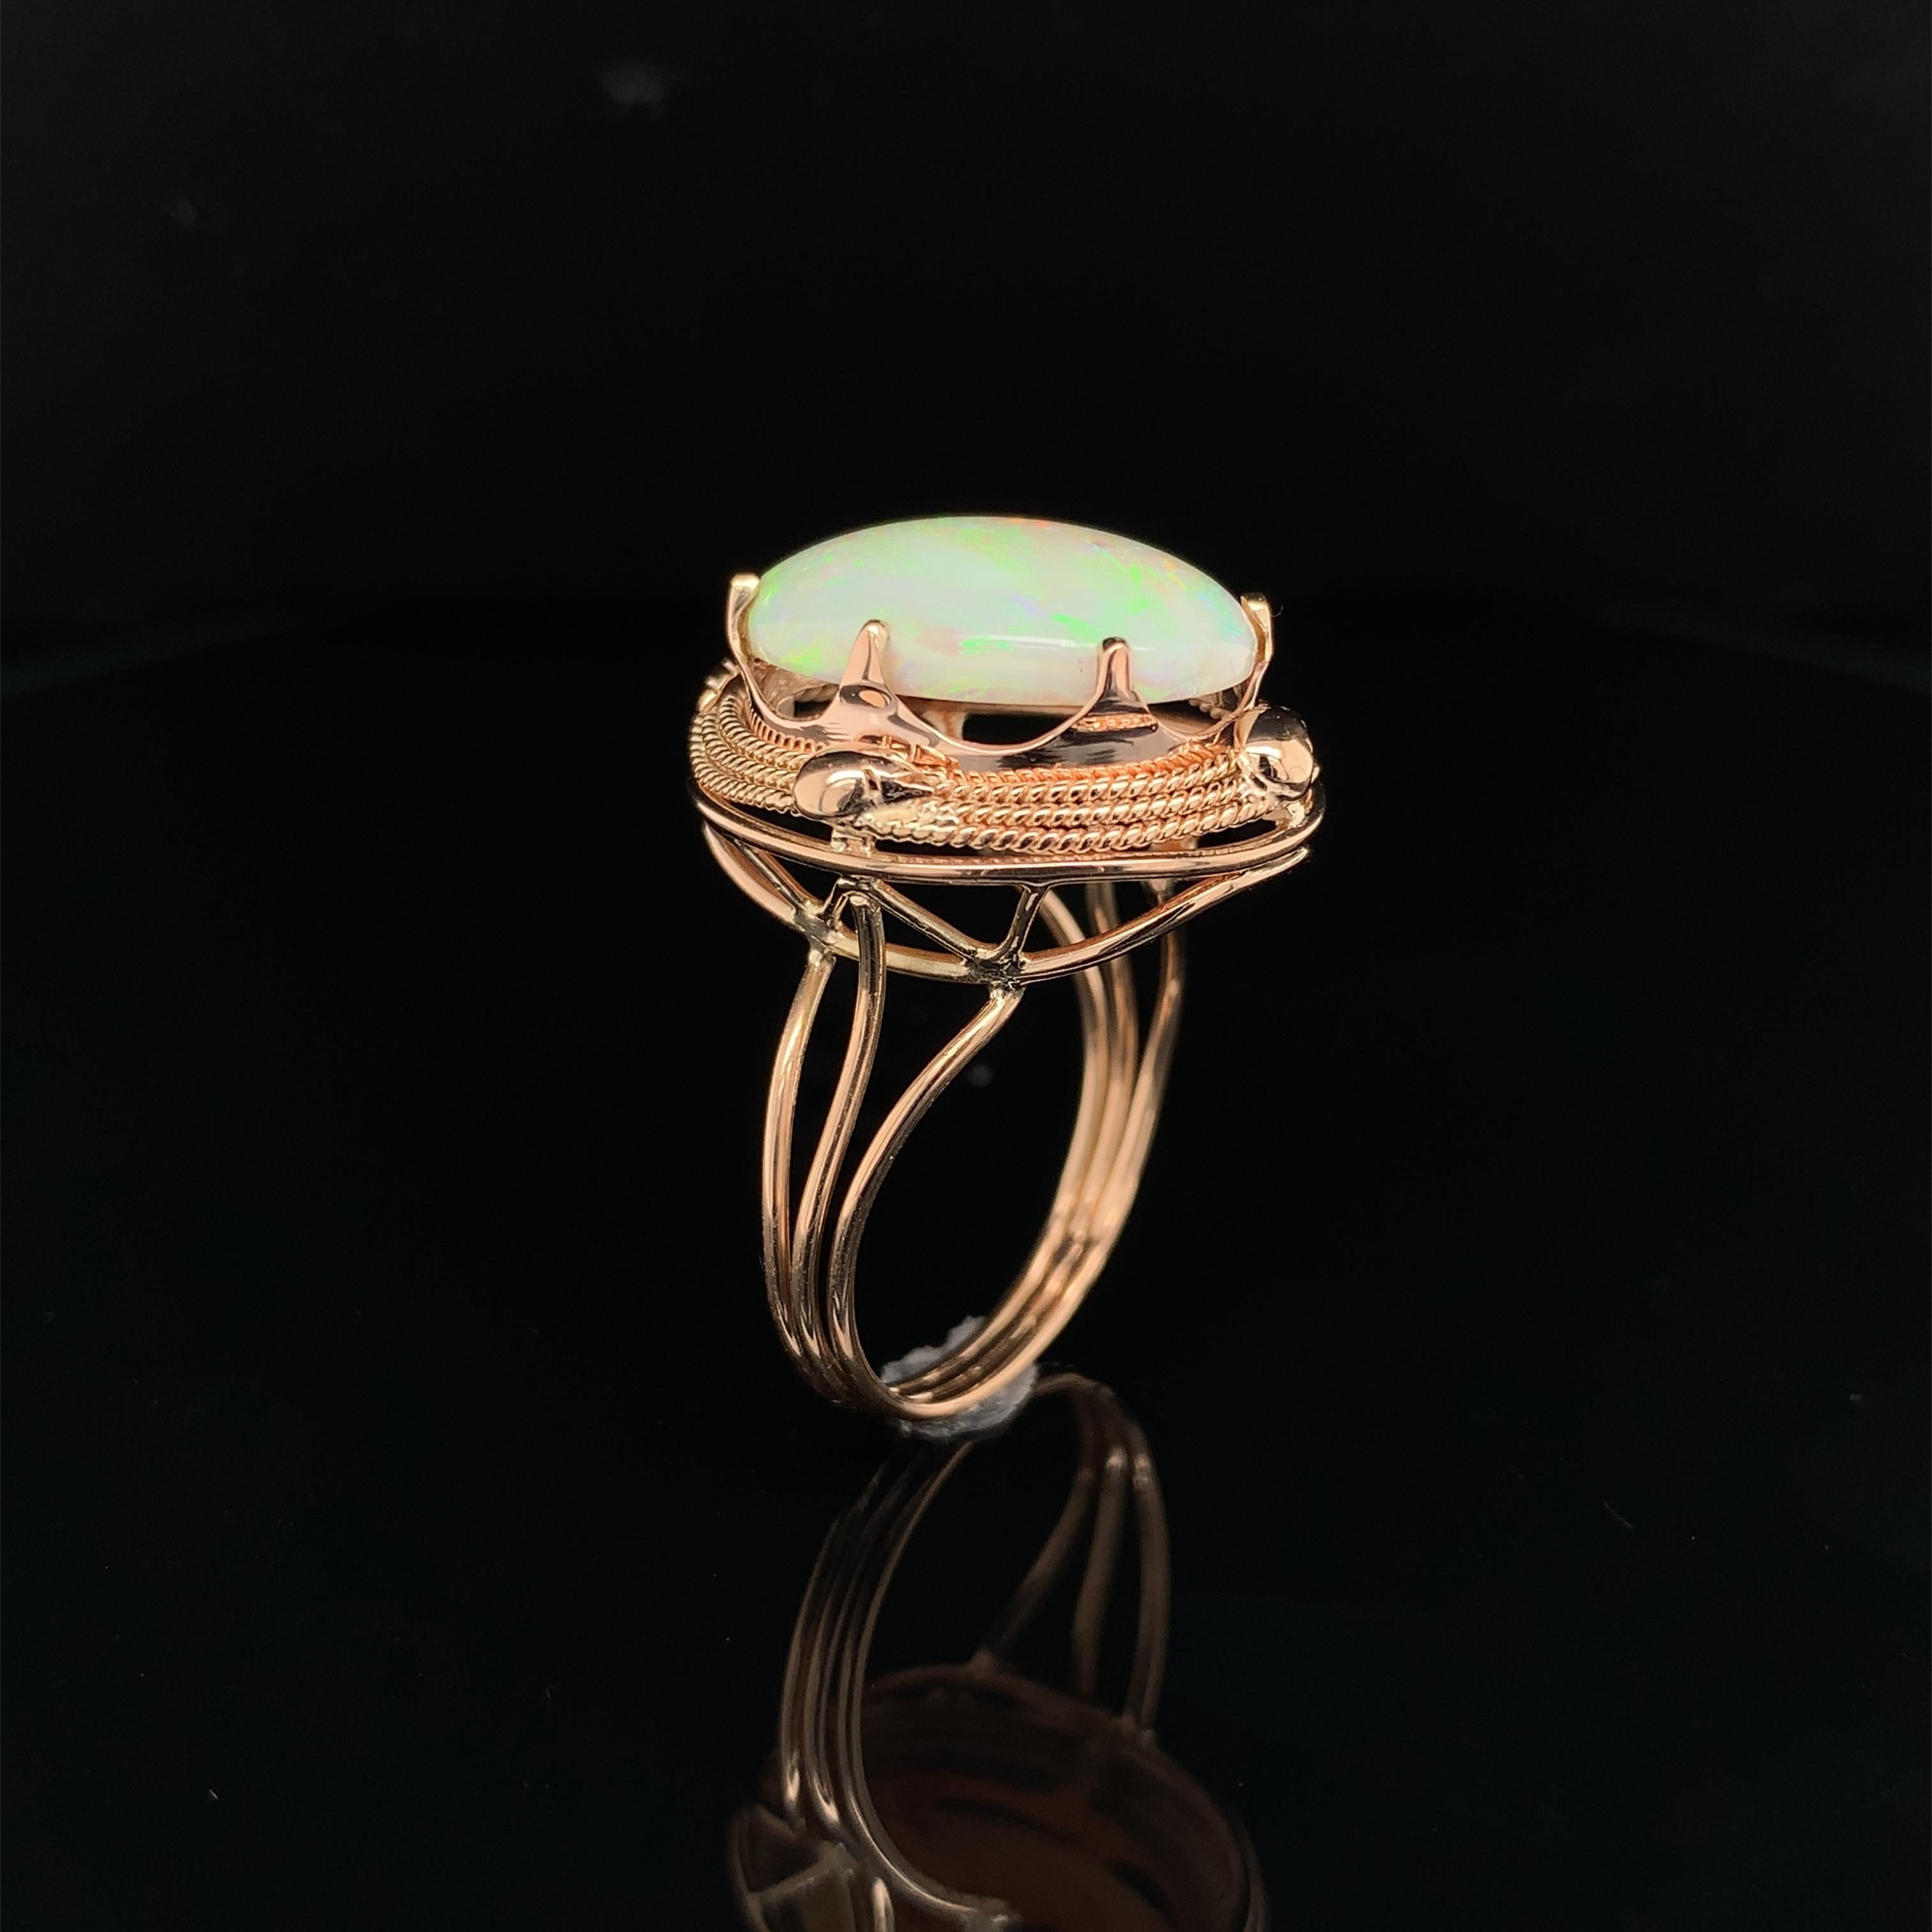 Oval Cut 14K Rose Gold Hand Wrought Ring with a large 6.05 carat Australian Opal For Sale